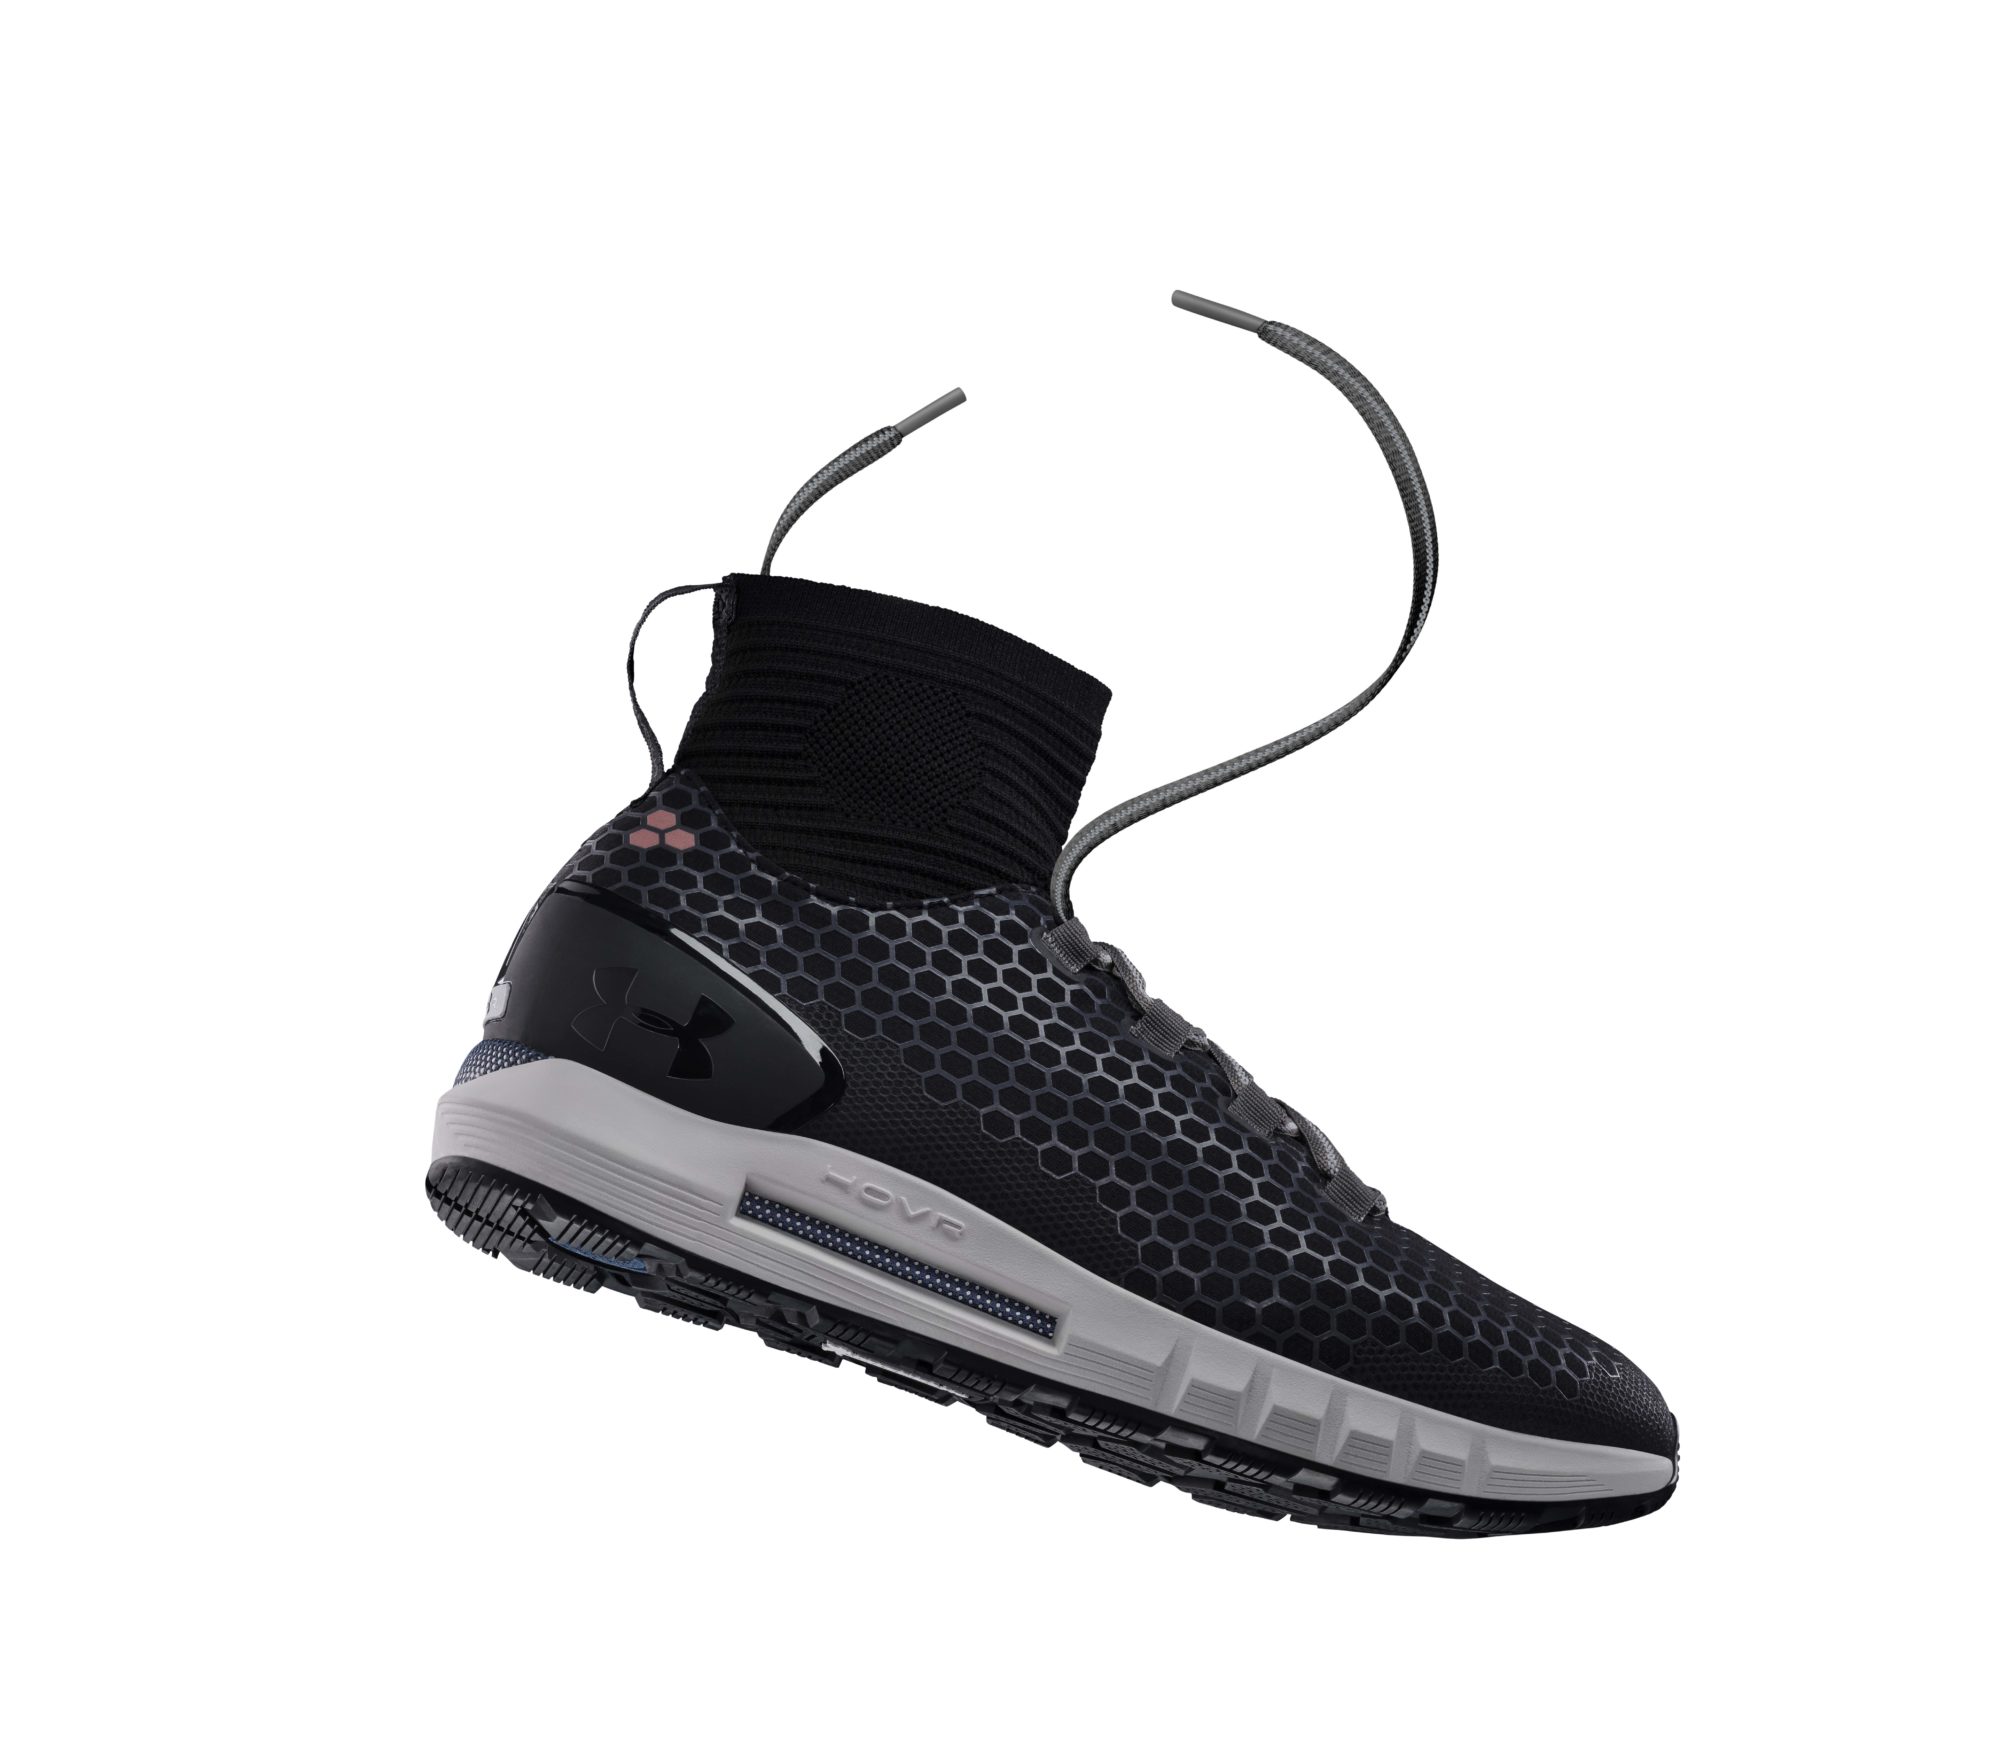 afijo mostrador salami UA HOVR Coldgear Reactor with Michelin soles for winter runners - The Pill  Outdoor Journal